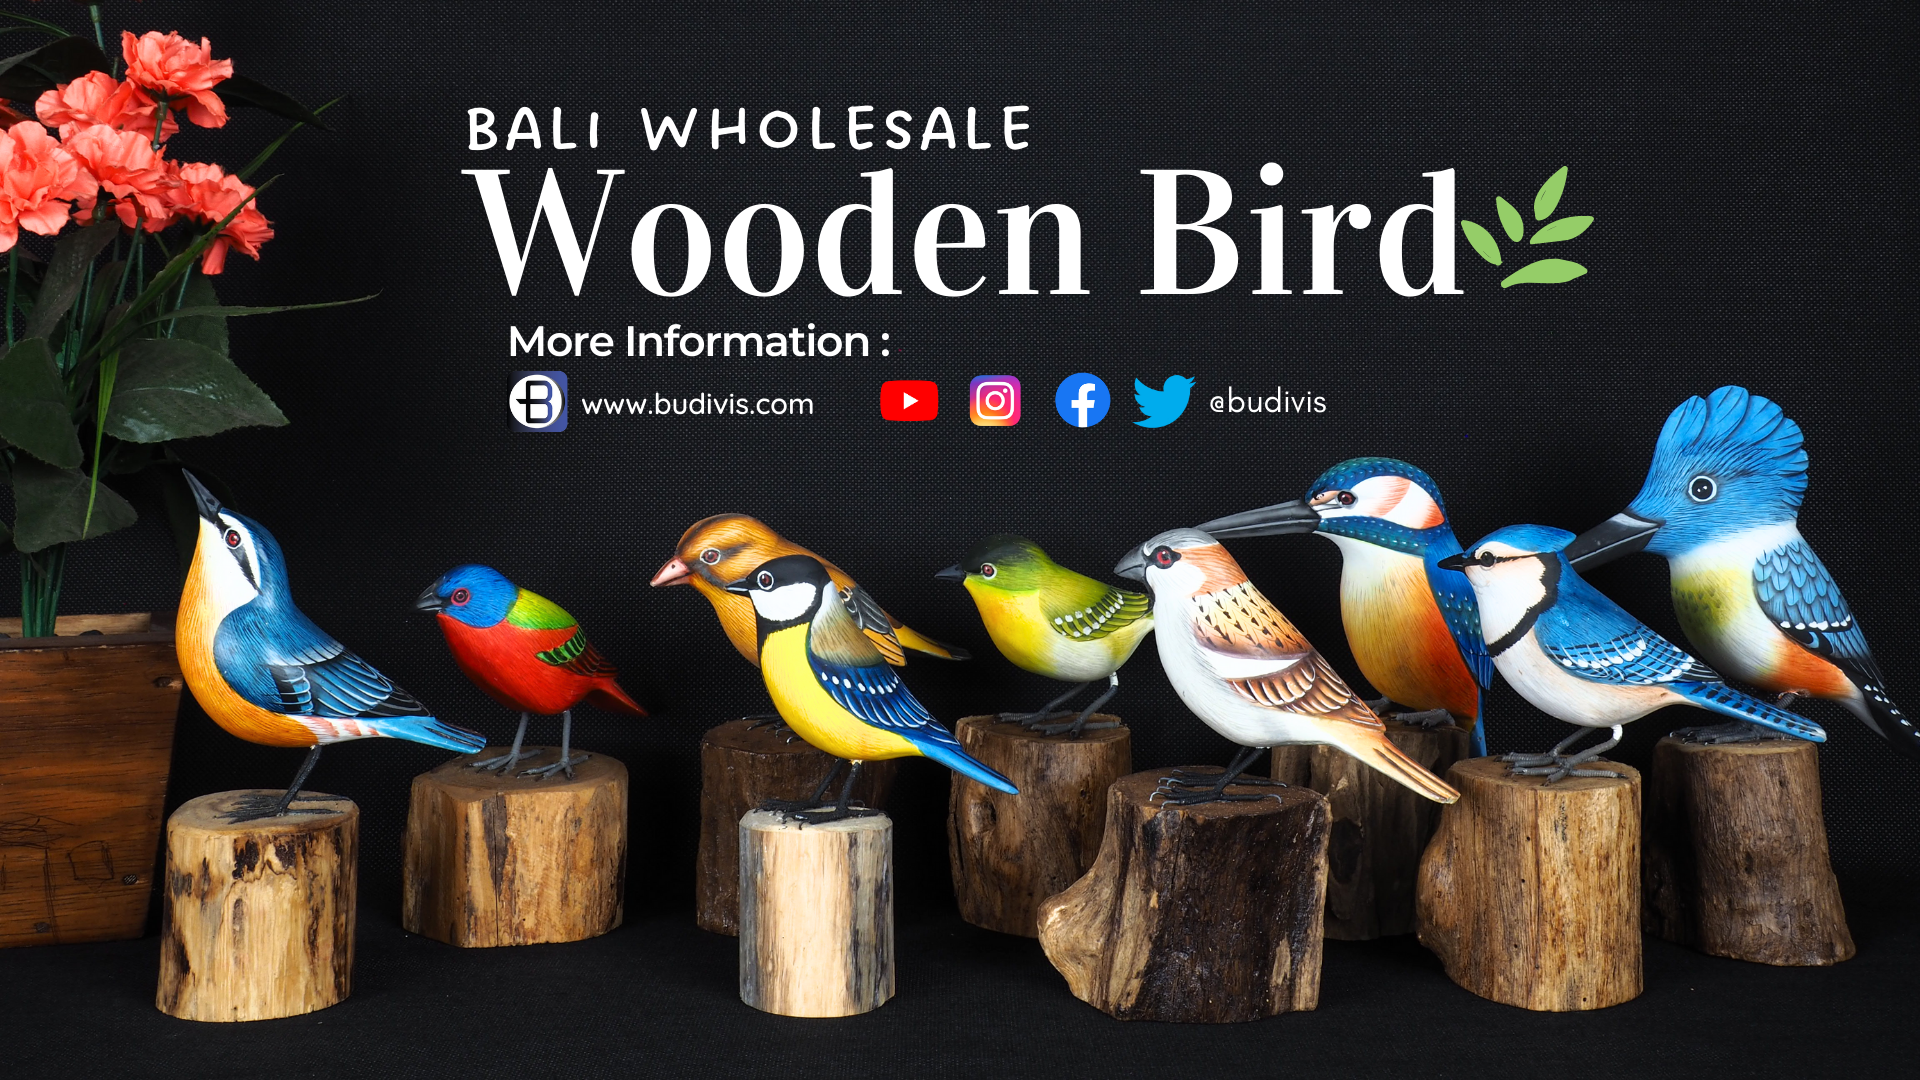 https://www.budivis.com/image/cache/catalog/A%20Blog/A%20blog%20pic/new/Wooden%20Bird-1920x1080.png